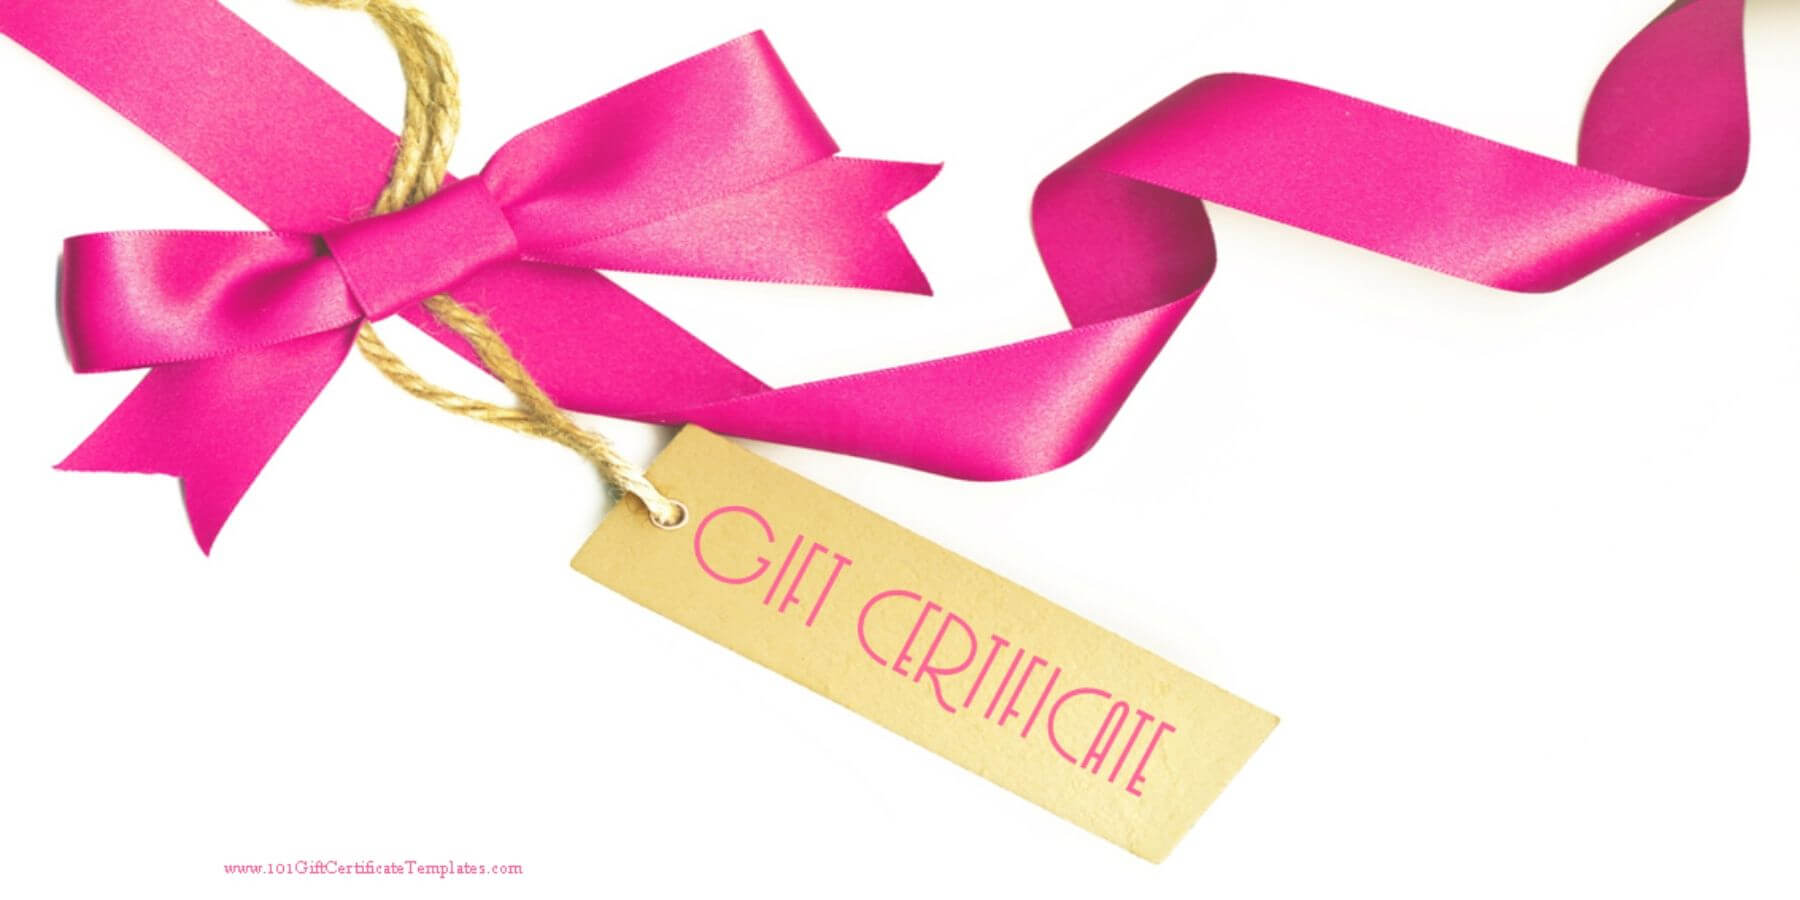 Gift Certificate With A White Background And A Pink Ribbon Throughout Pink Gift Certificate Template